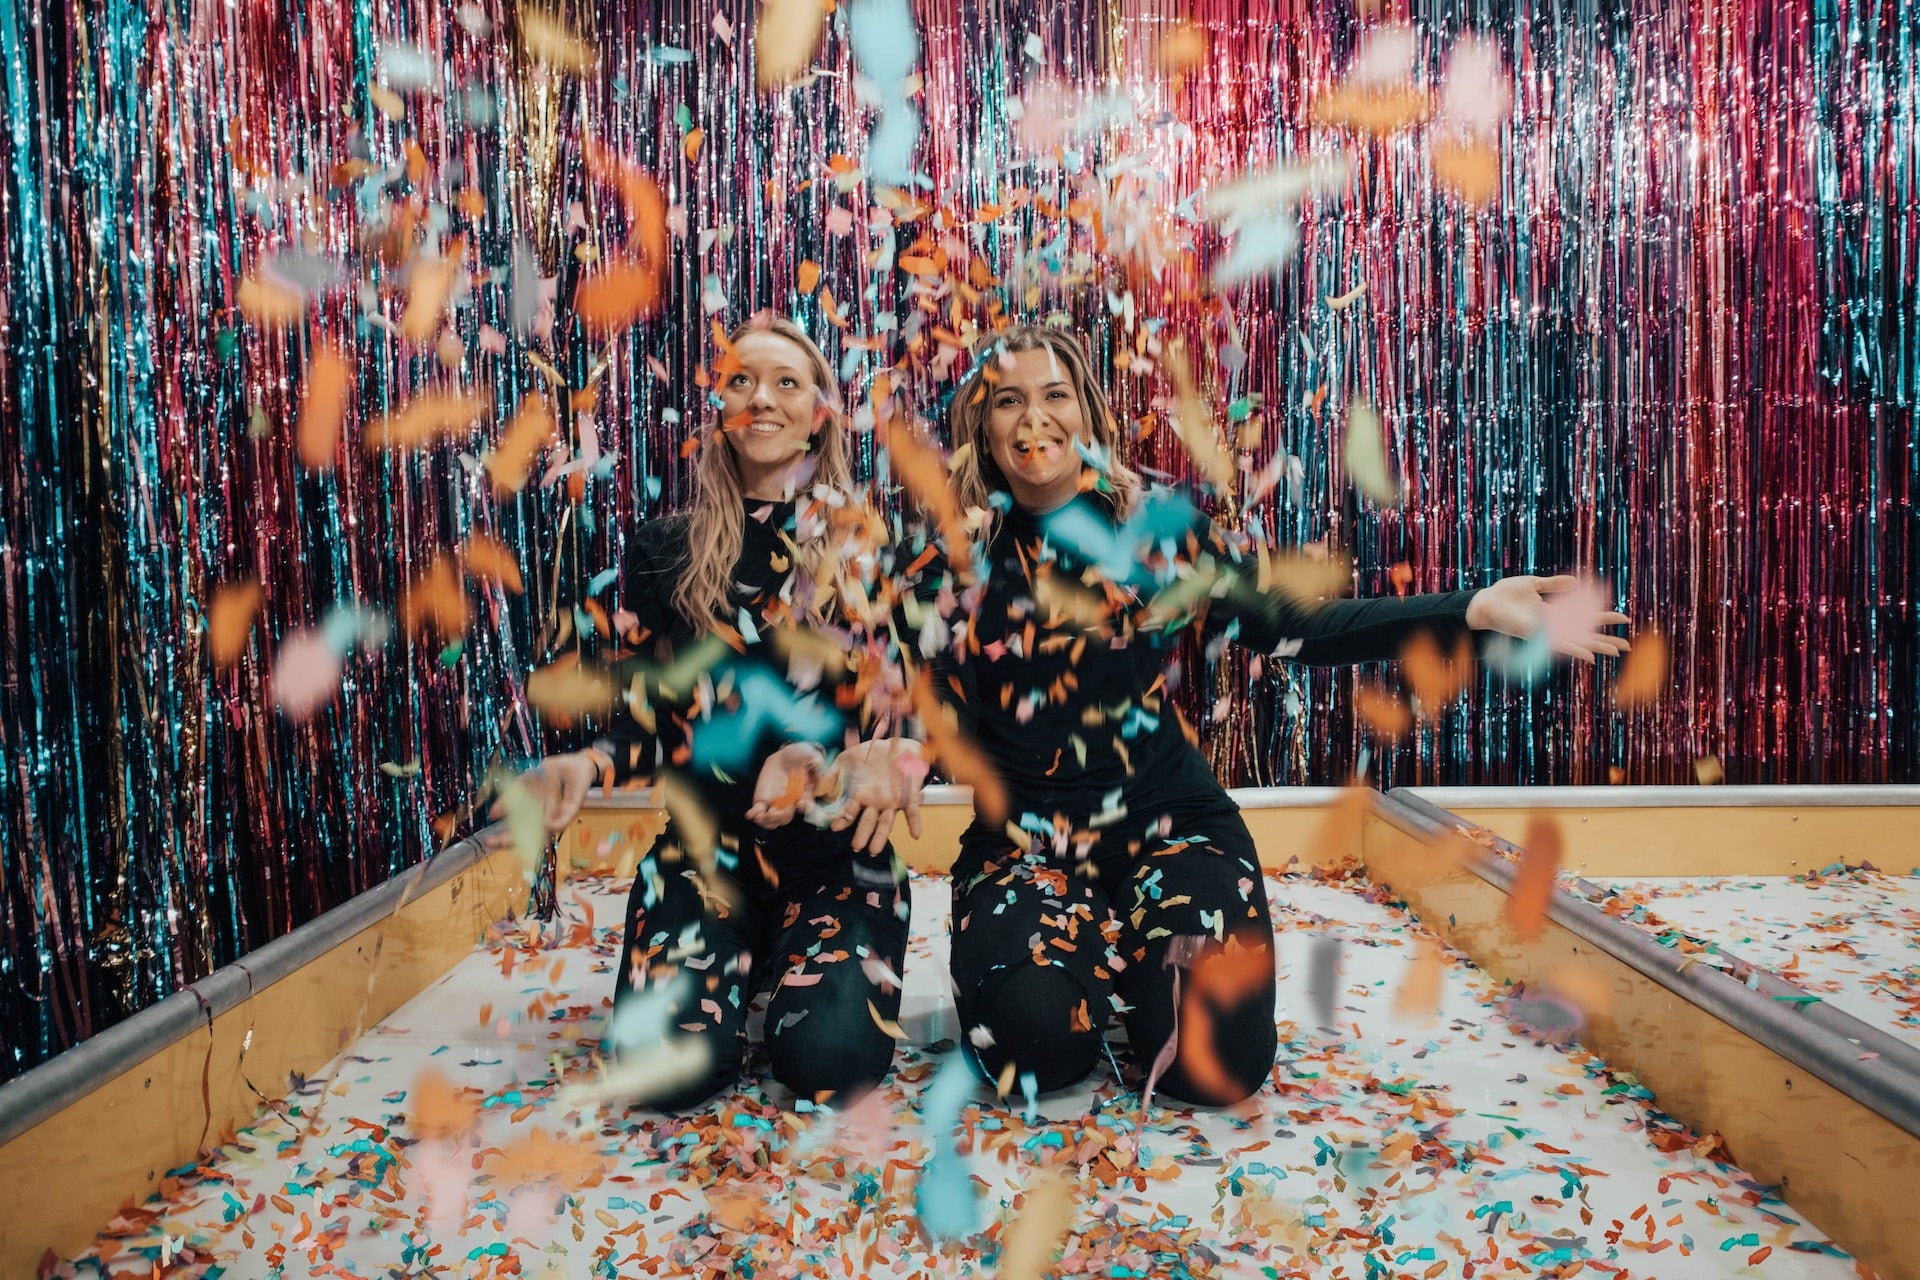 Two ladies throwing off confetti